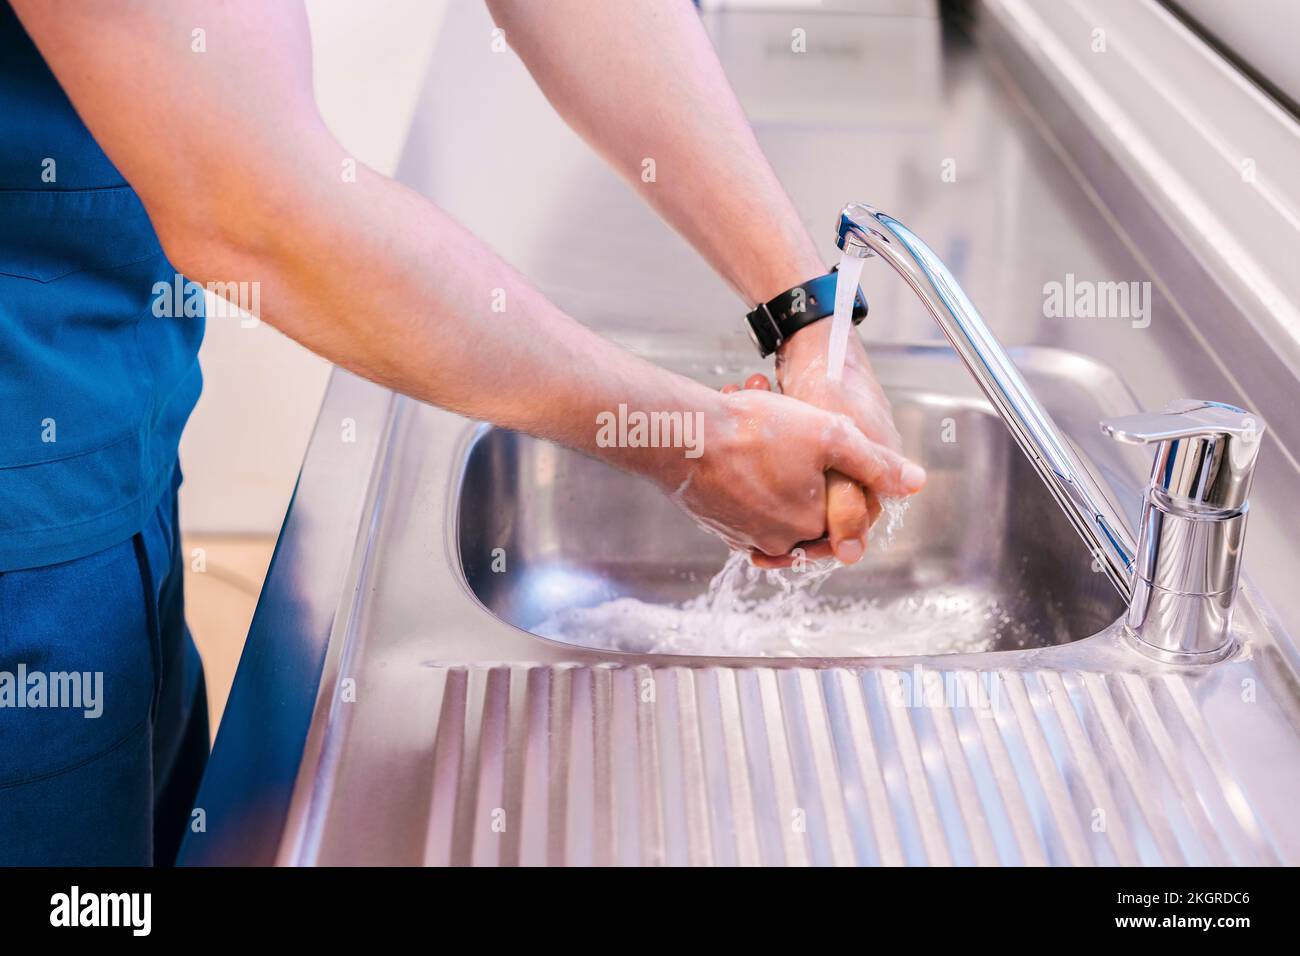 Young doctor washing hands with water in sink at hospital Stock Photo